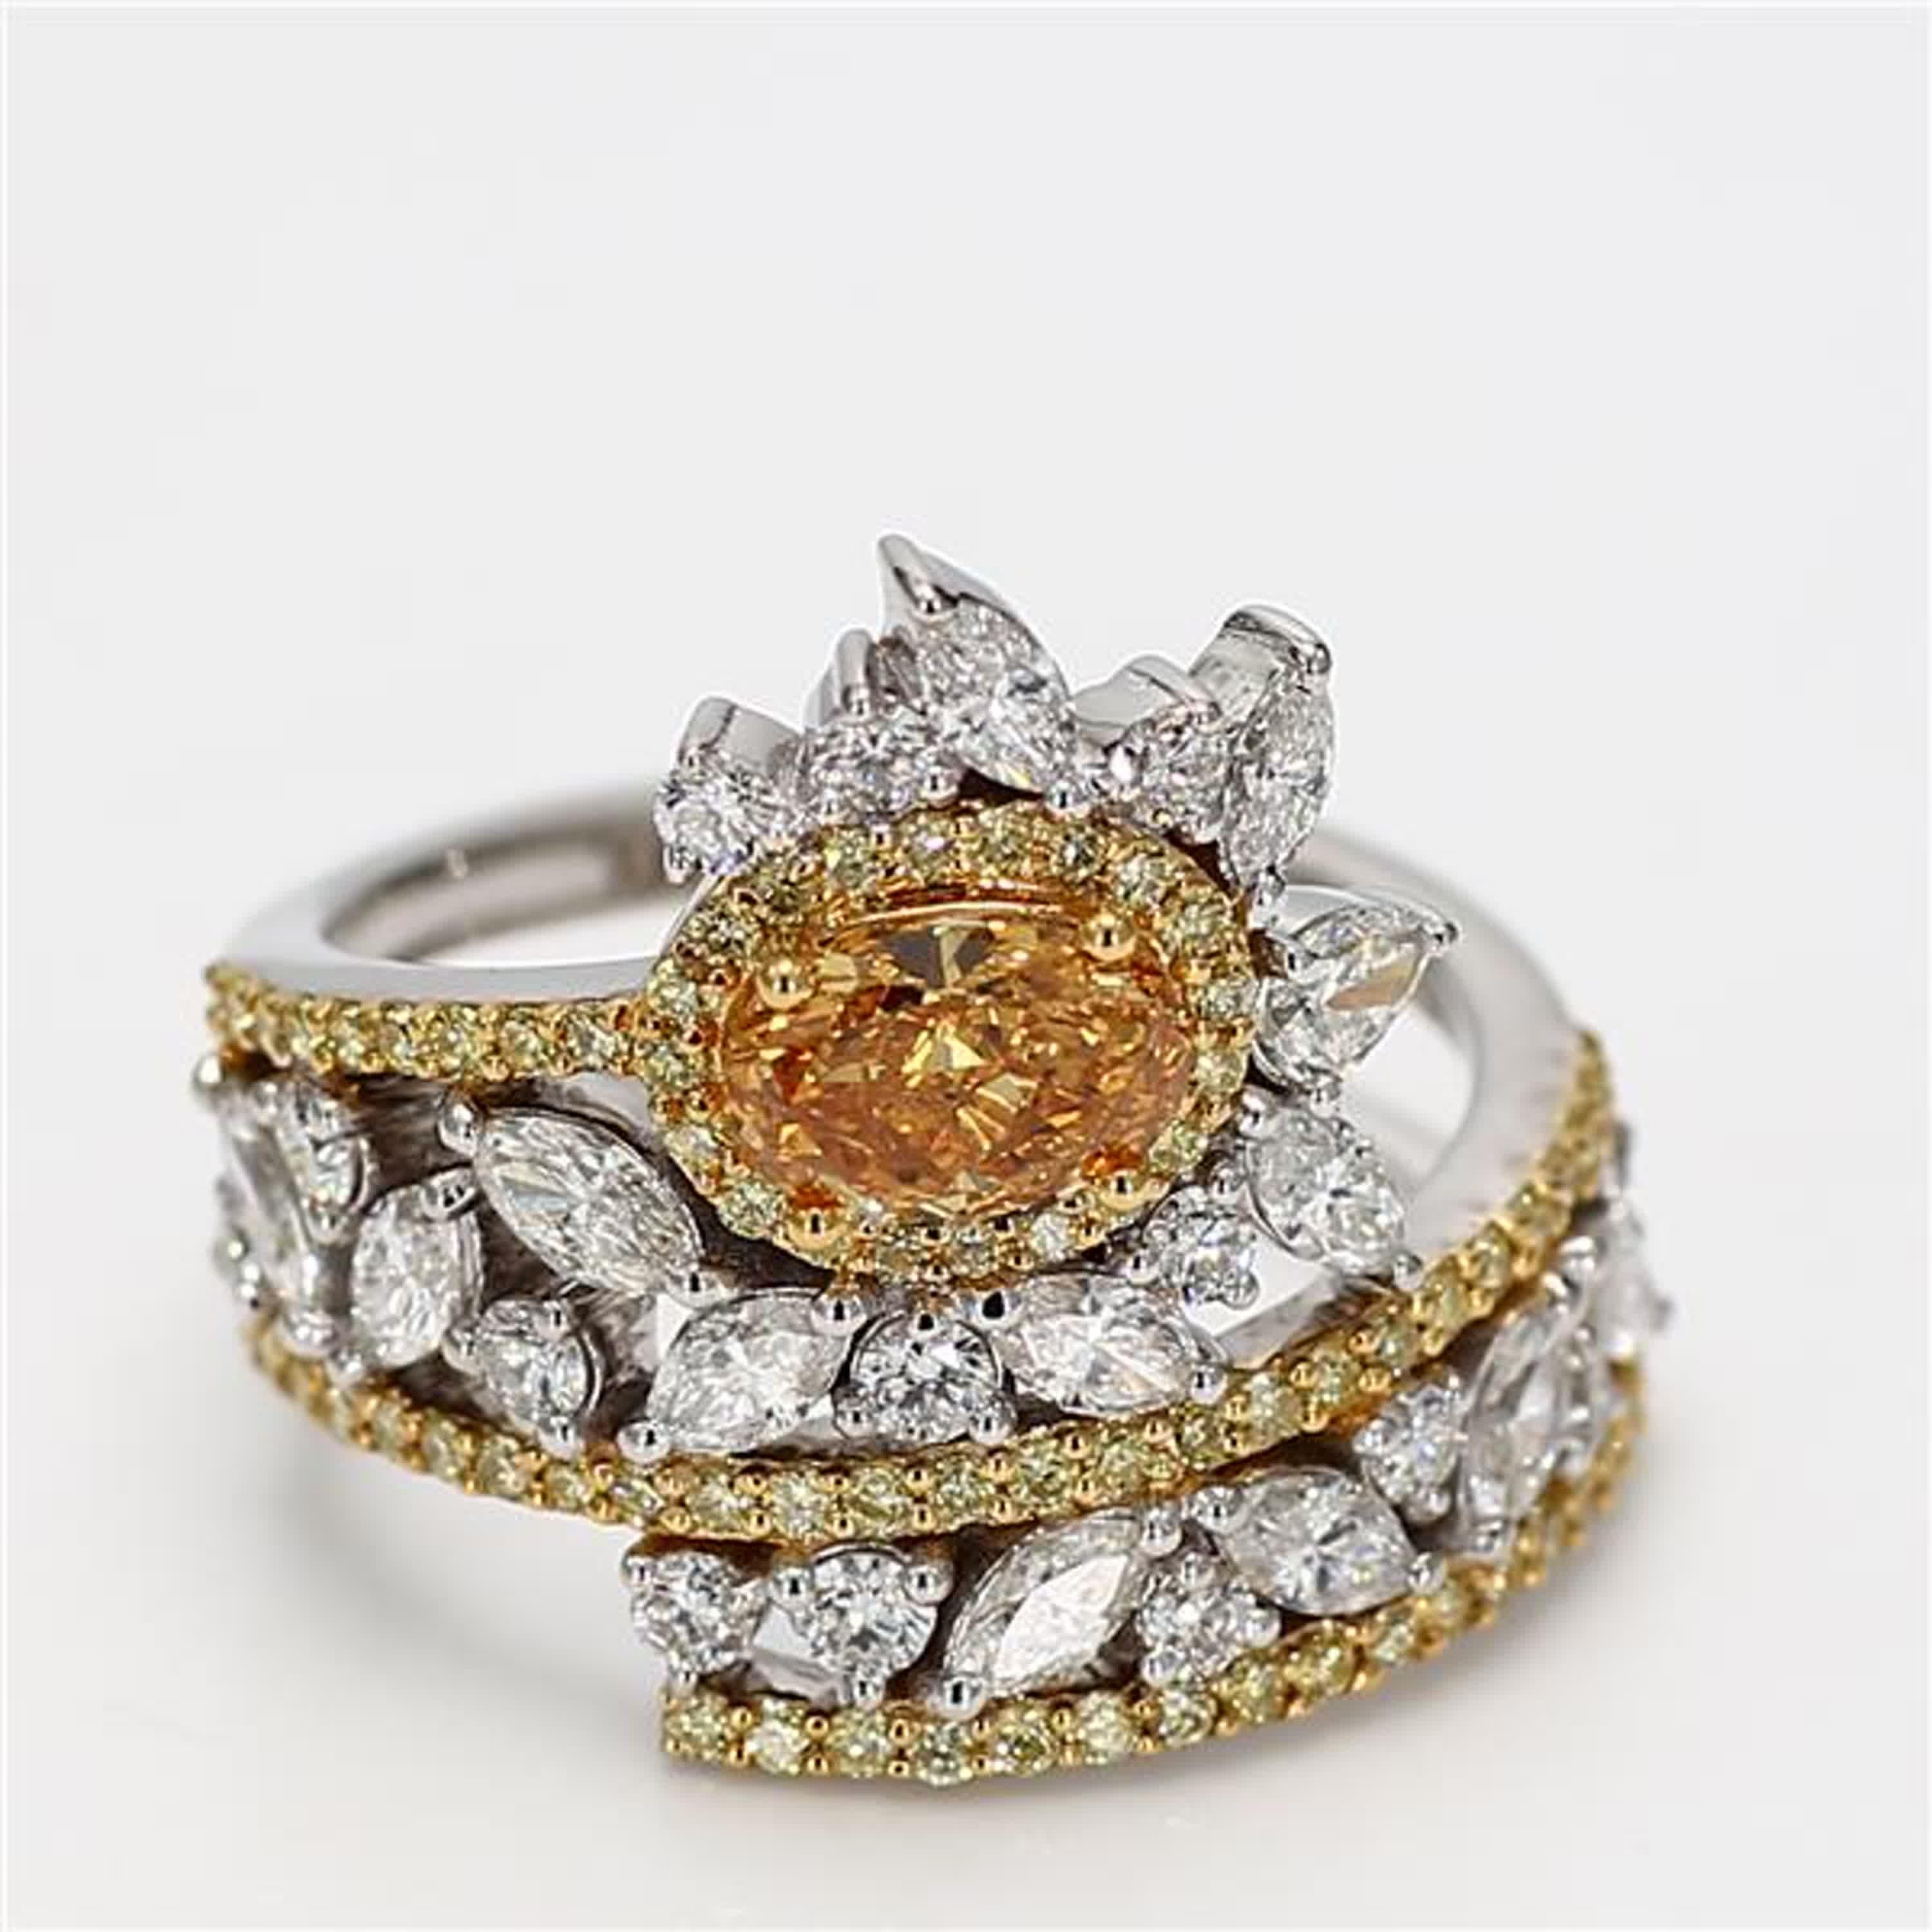 RareGemWorld's classic GIA certified diamond ring. Mounted in a beautiful 18K Yellow and White Gold setting with a natural oval cut orangy yellow diamond. The orangy yellow diamond is surrounded by natural marquise cut white diamonds, natural pear